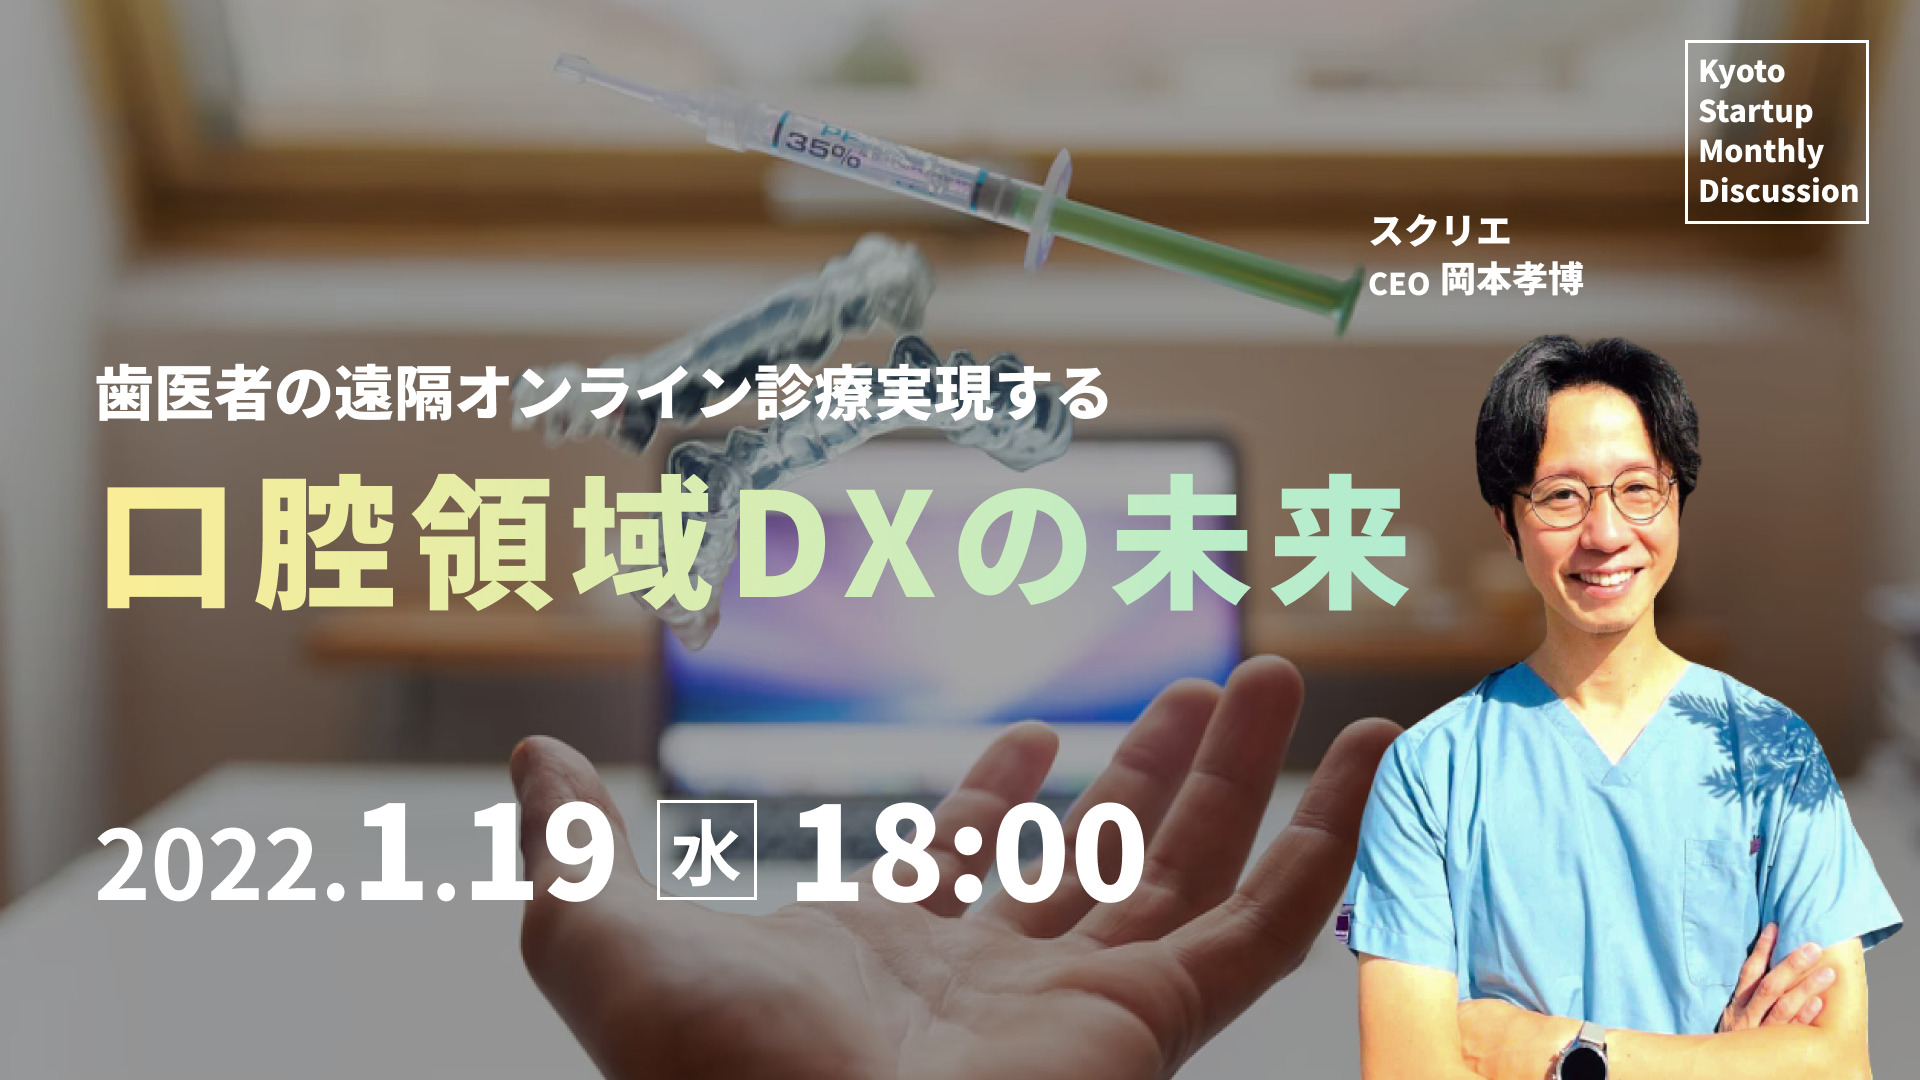 Kyoto Startup Monthly Discussion #08